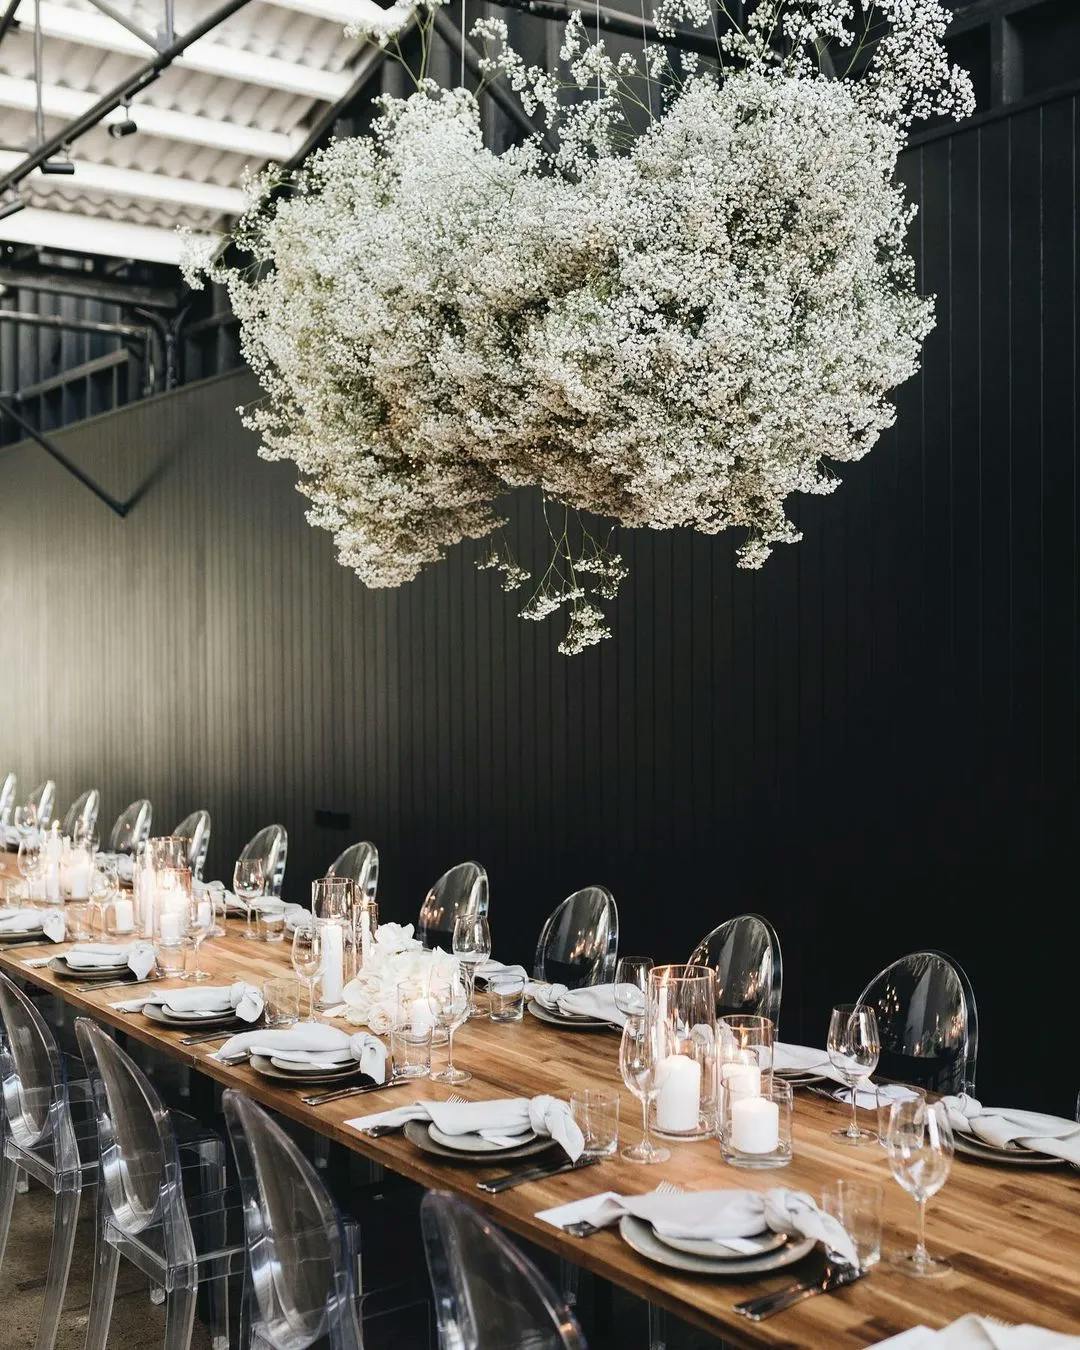 A long wooden table is set for a meal with white plates, napkins, glassware, and candles. Clear chairs surround the table. Above, a large, lush cloud-like arrangement of baby's breath flowers is suspended. The walls are dark, contrasting with the bright setting.